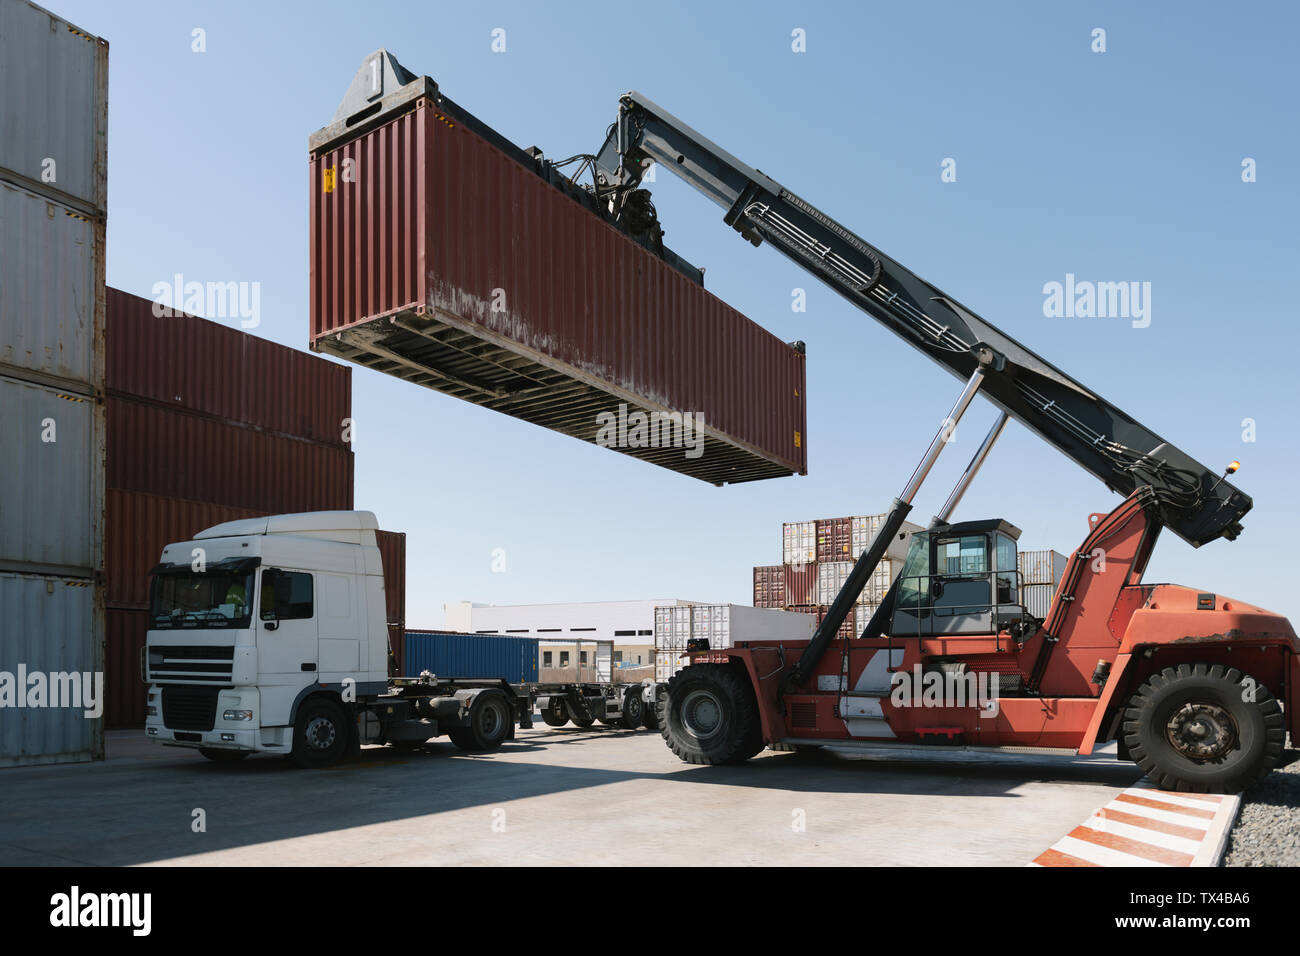 Crane lifting cargo container on truck on industrial site Stock Photo